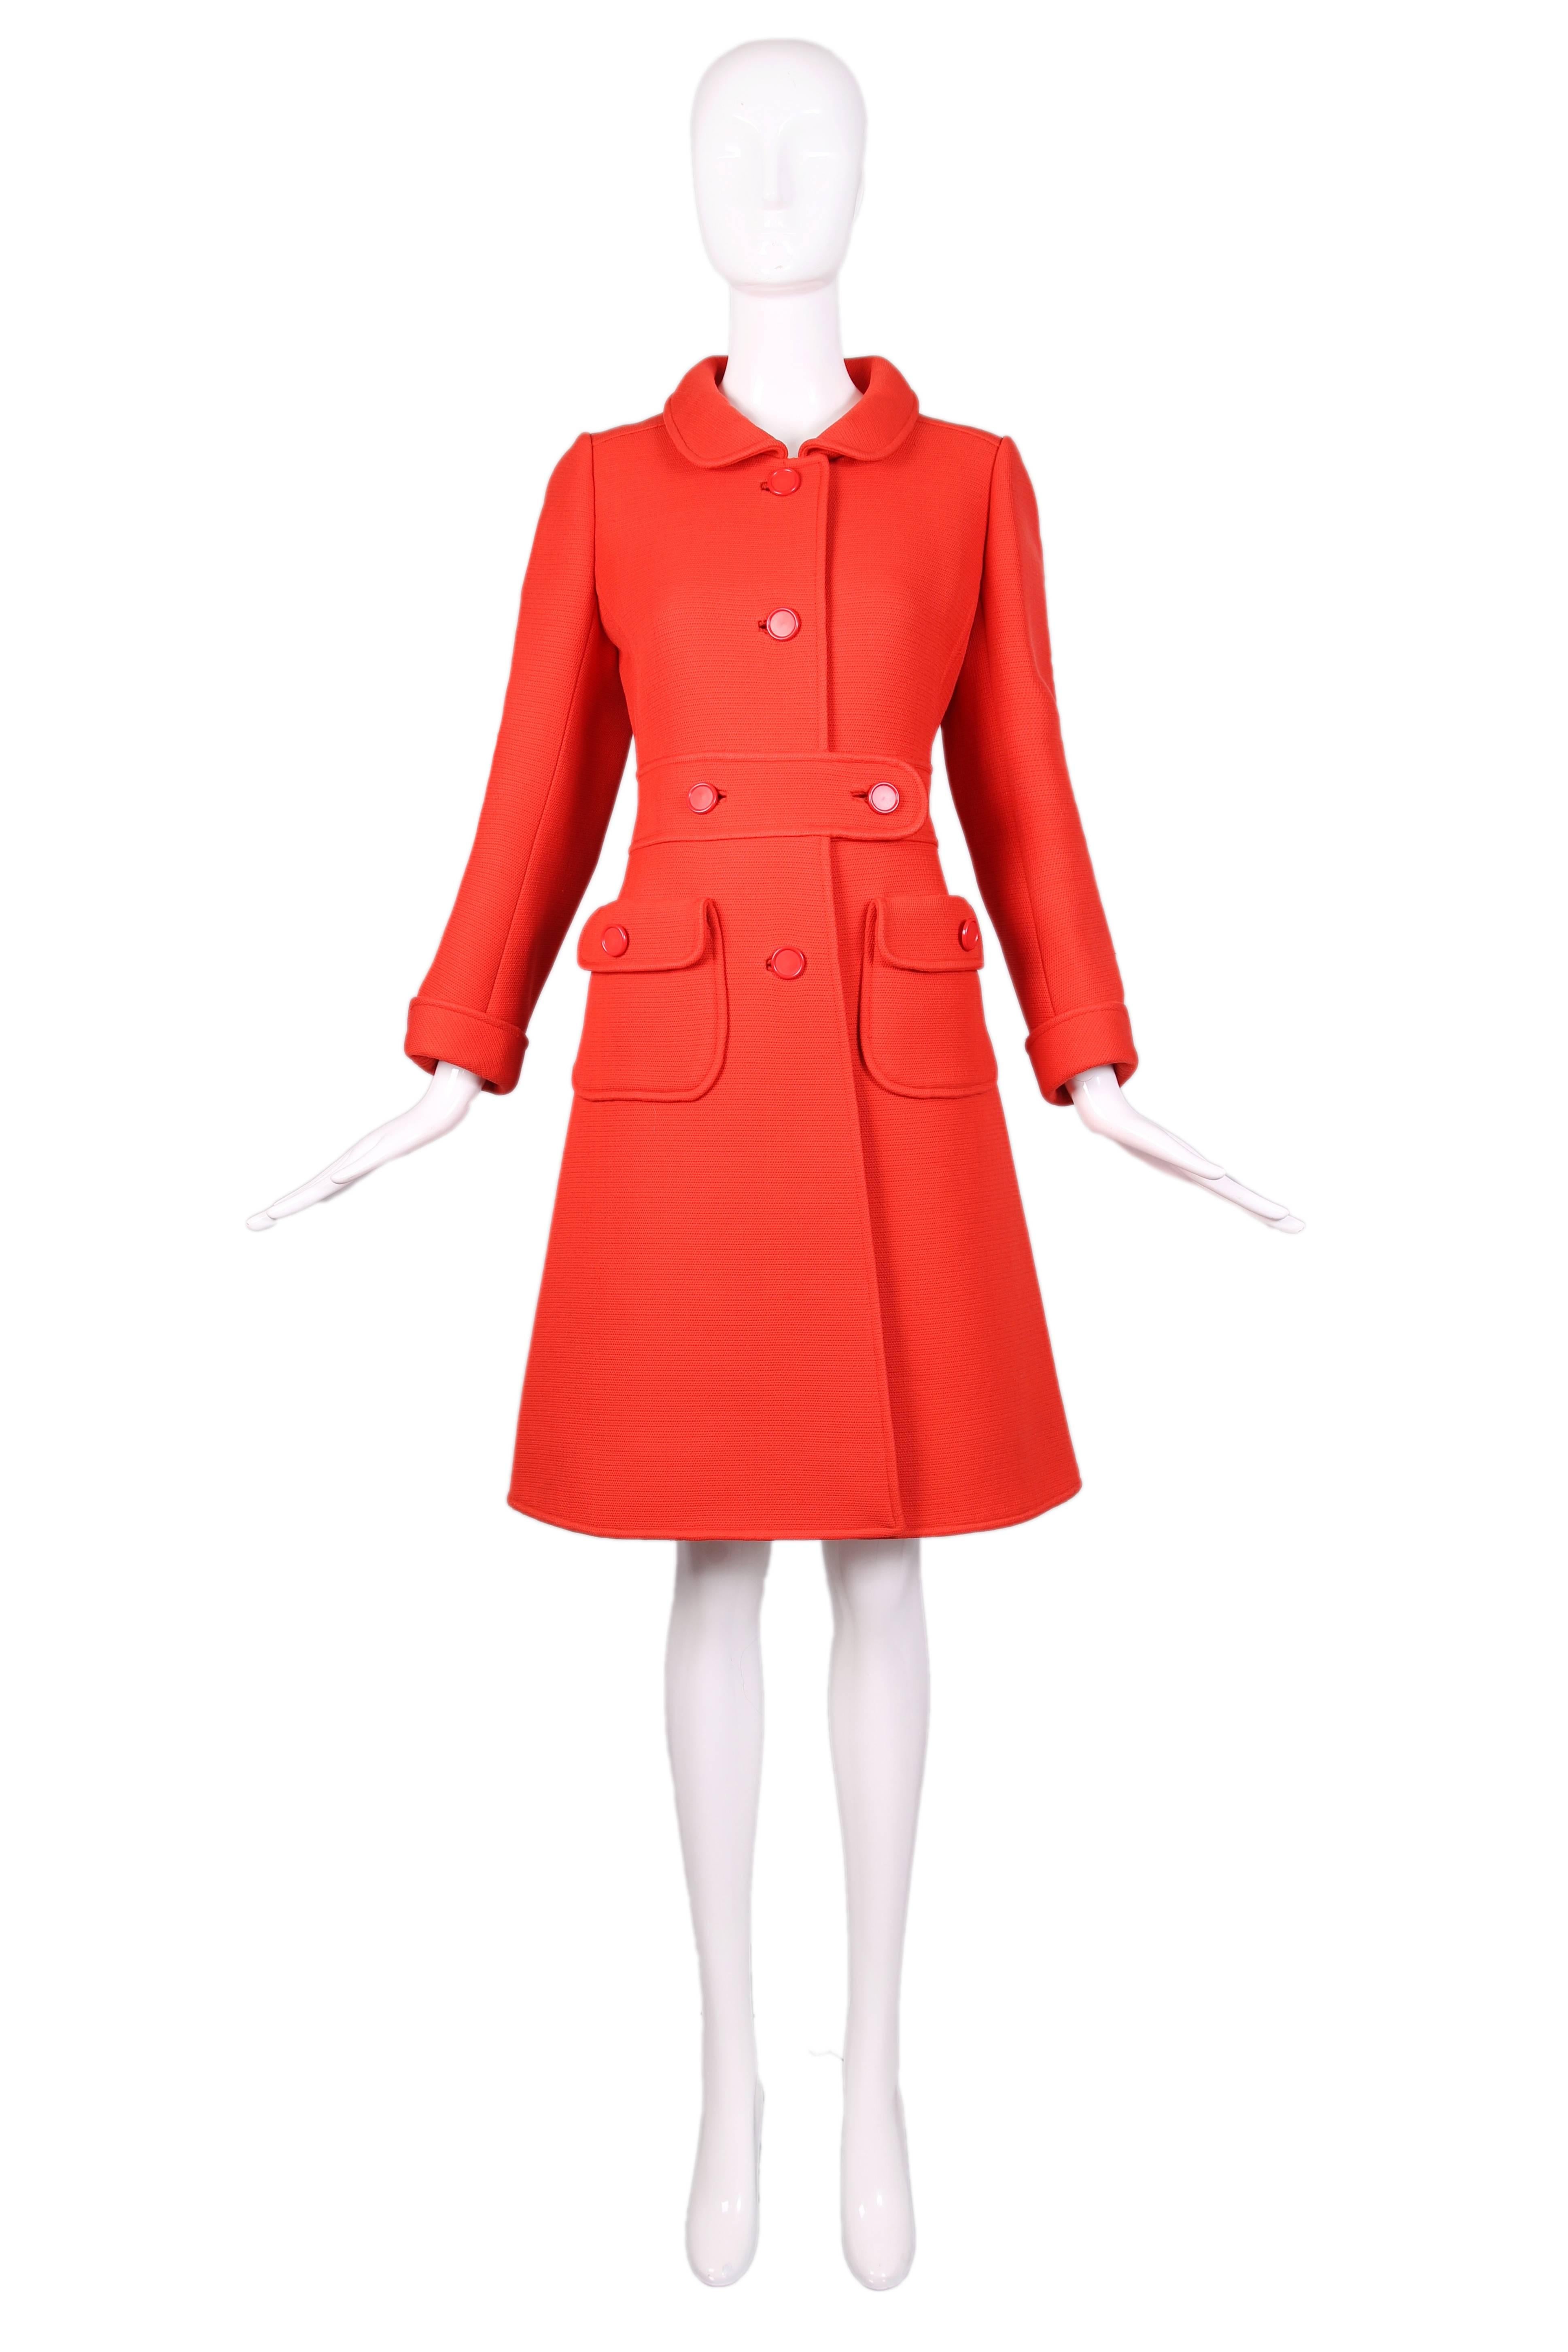 1960's Courreges haute couture orange wool A-line mod coat with orange buttons and two front pockets. In excellent condition with a few tiny pulls. No size tag, please consult measurements.
MEASUREMENTS:
Bust - 36